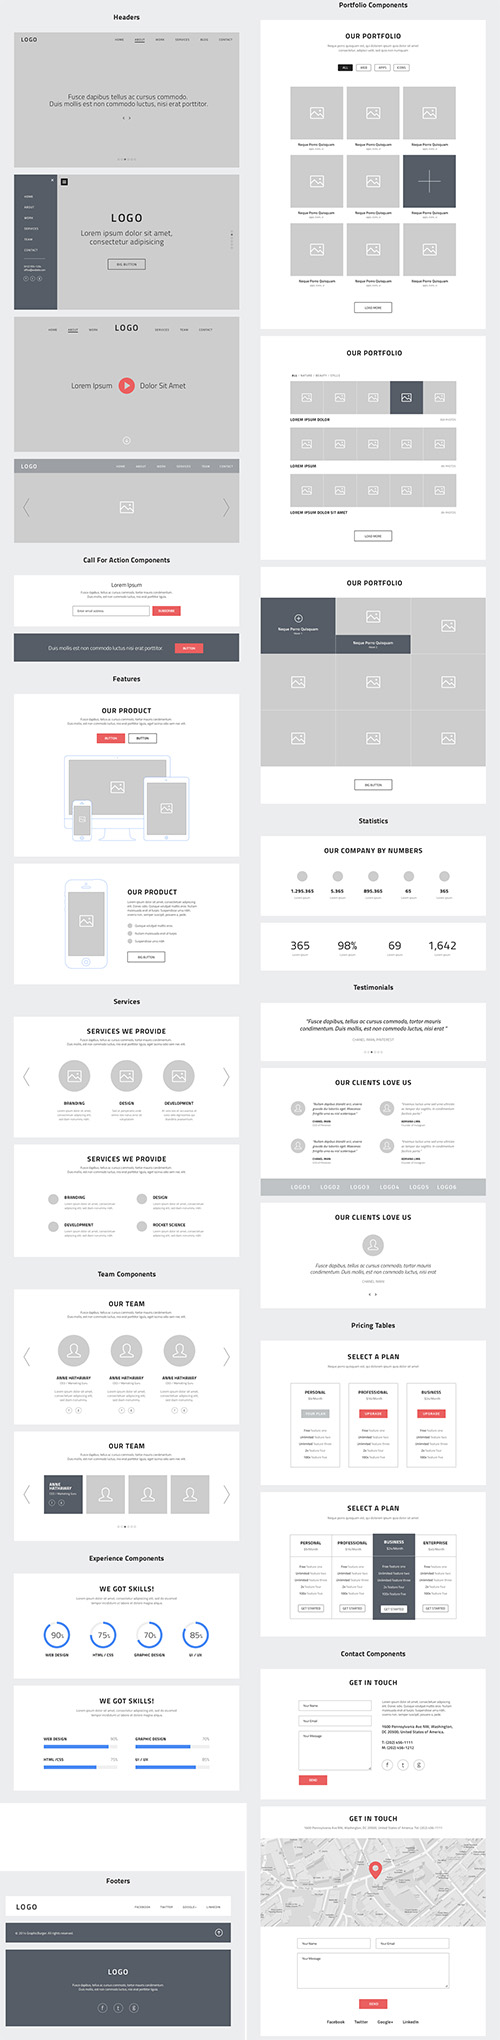 PSD Web Design - One Page Website Wireframes